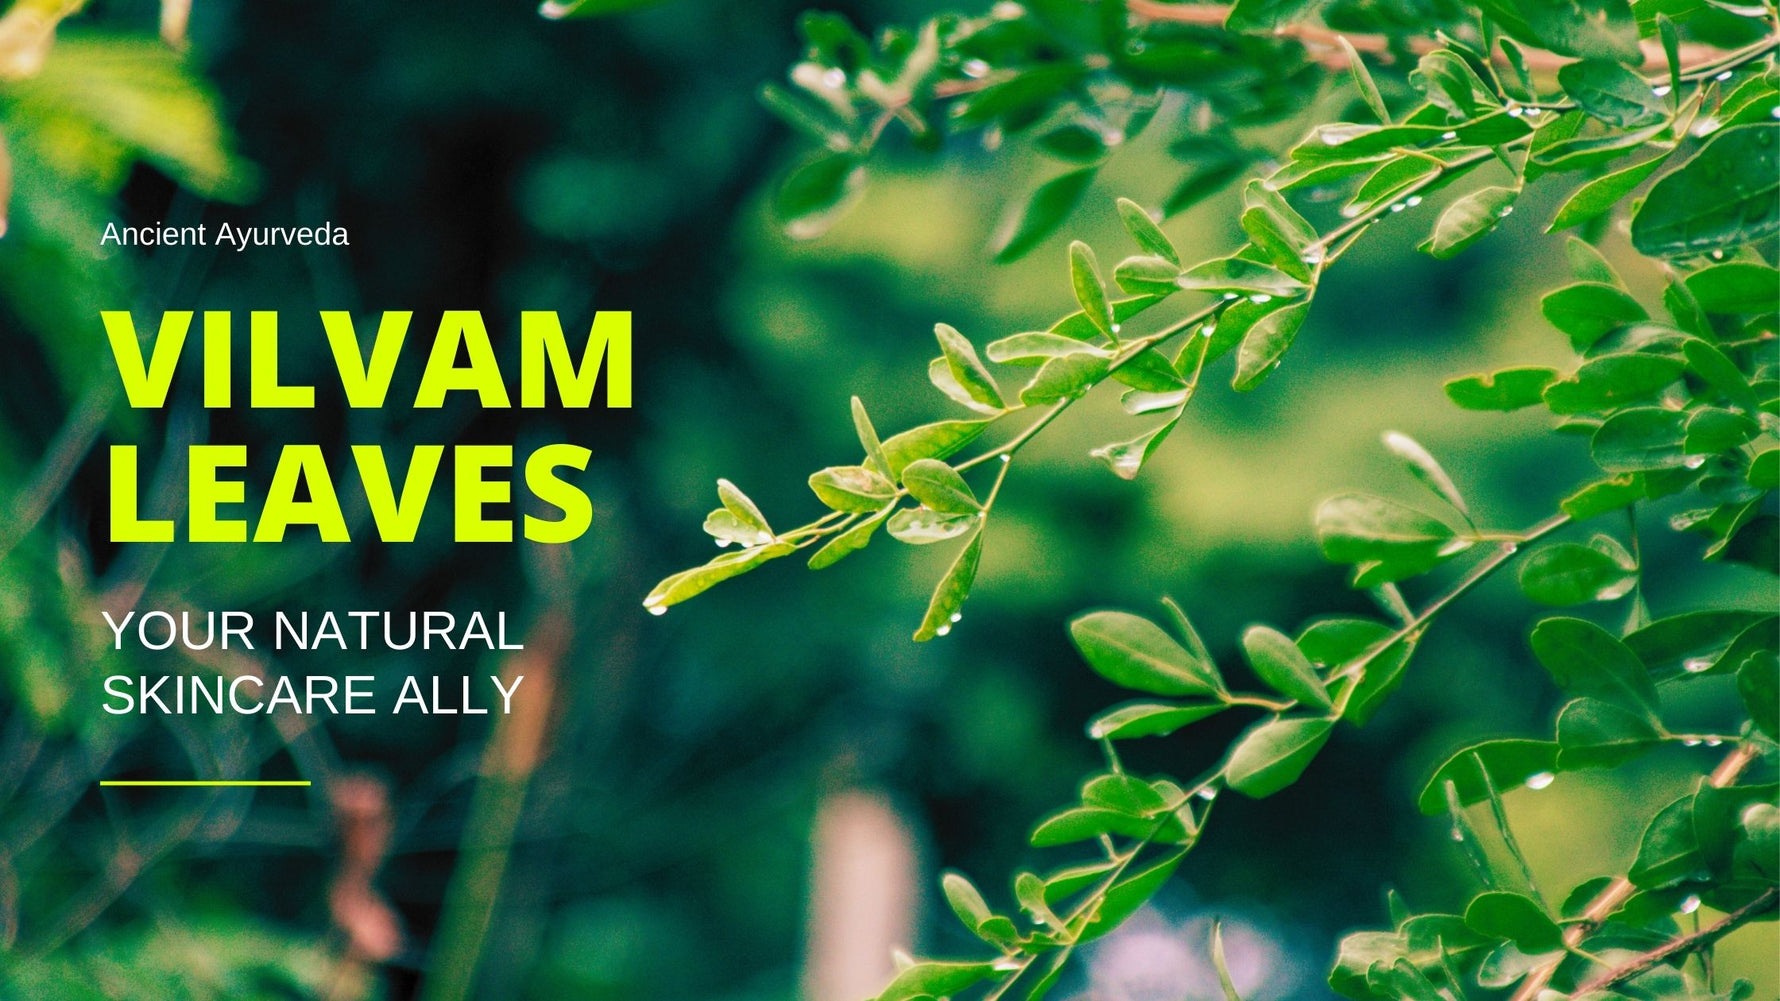 Vilvam Leaves: Your Natural Skincare Ally Unveiled